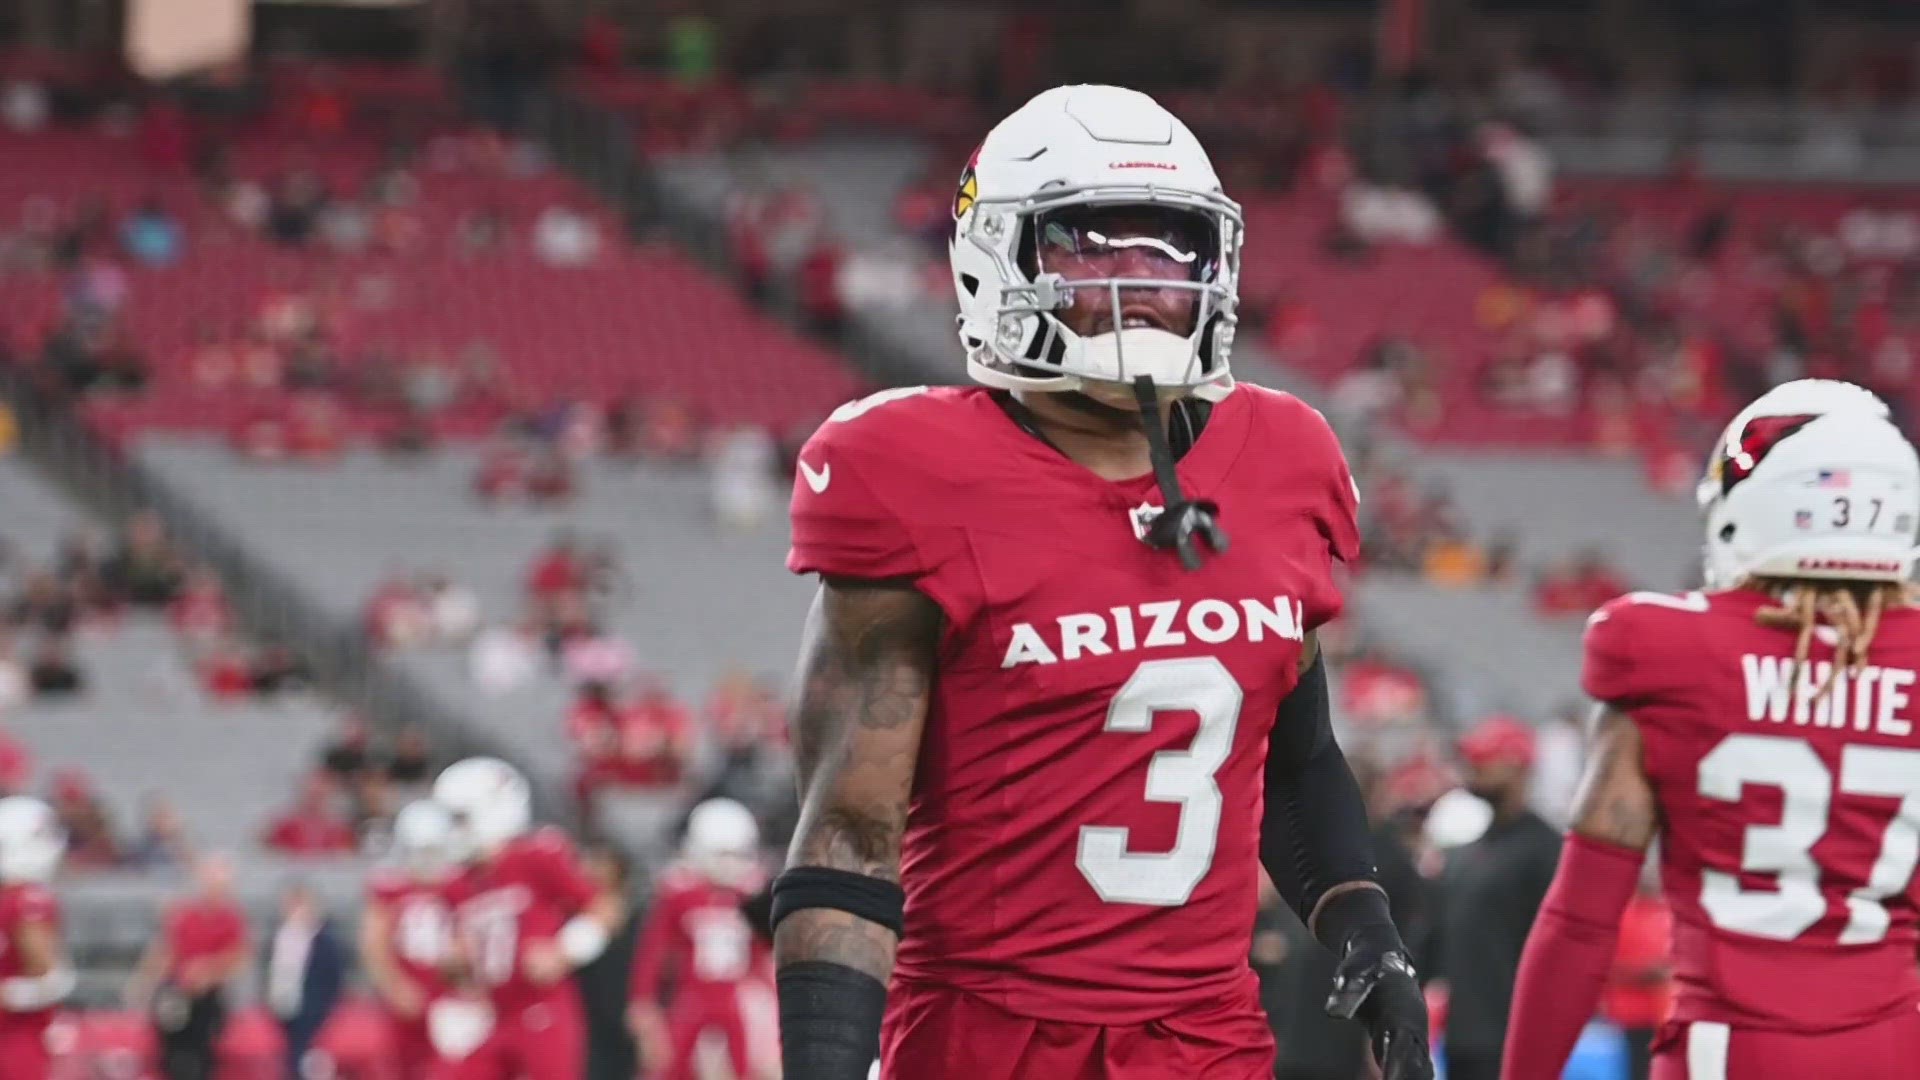 The Arizona Cardinals All-Pro safety will miss several games after going on Injured Reserve on Monday.